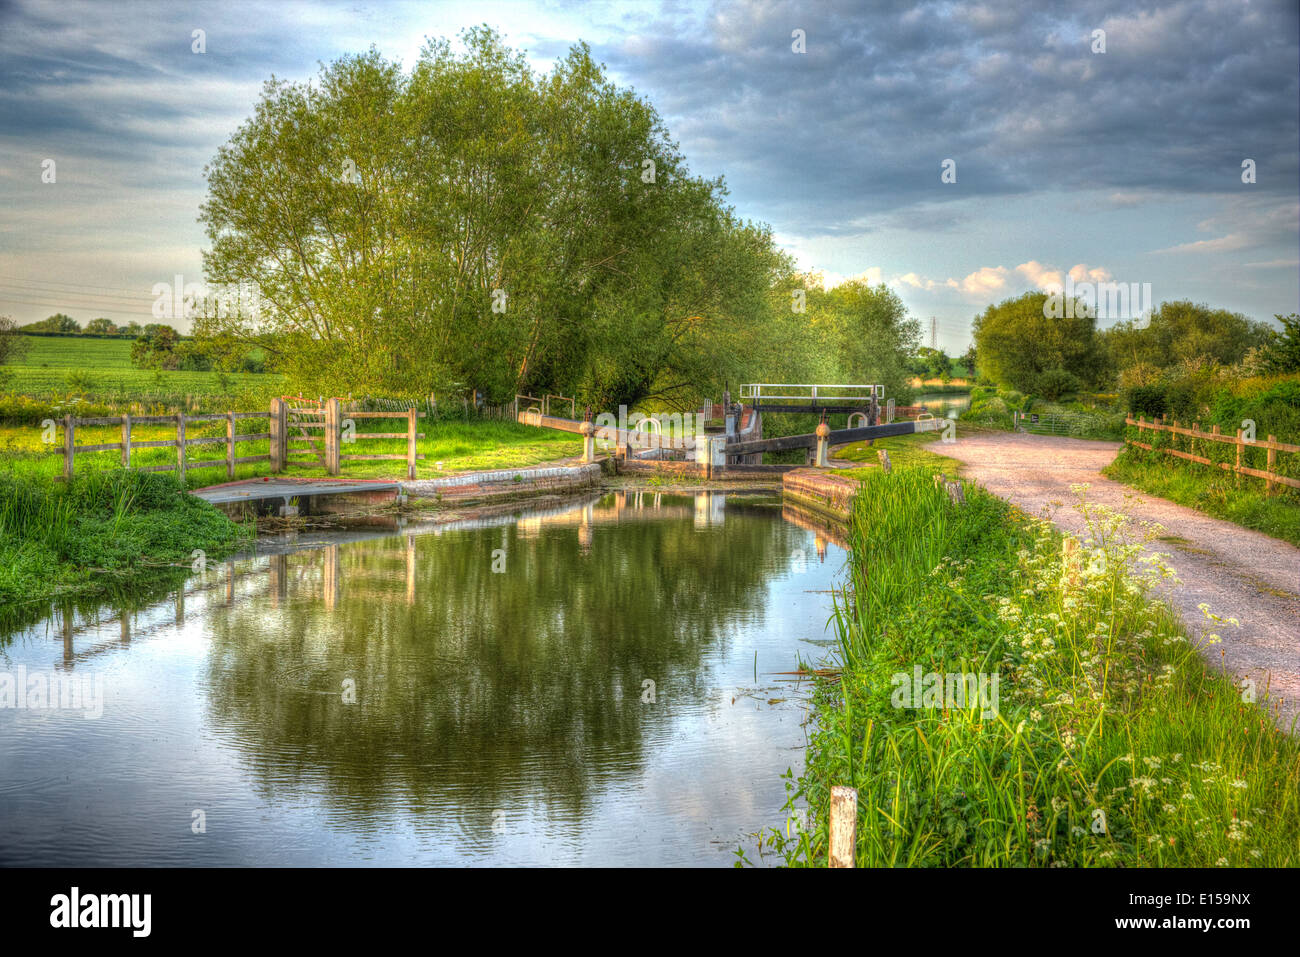 English countryside scene with canal and lock gates in colourful bright and vivid HDR Stock Photo